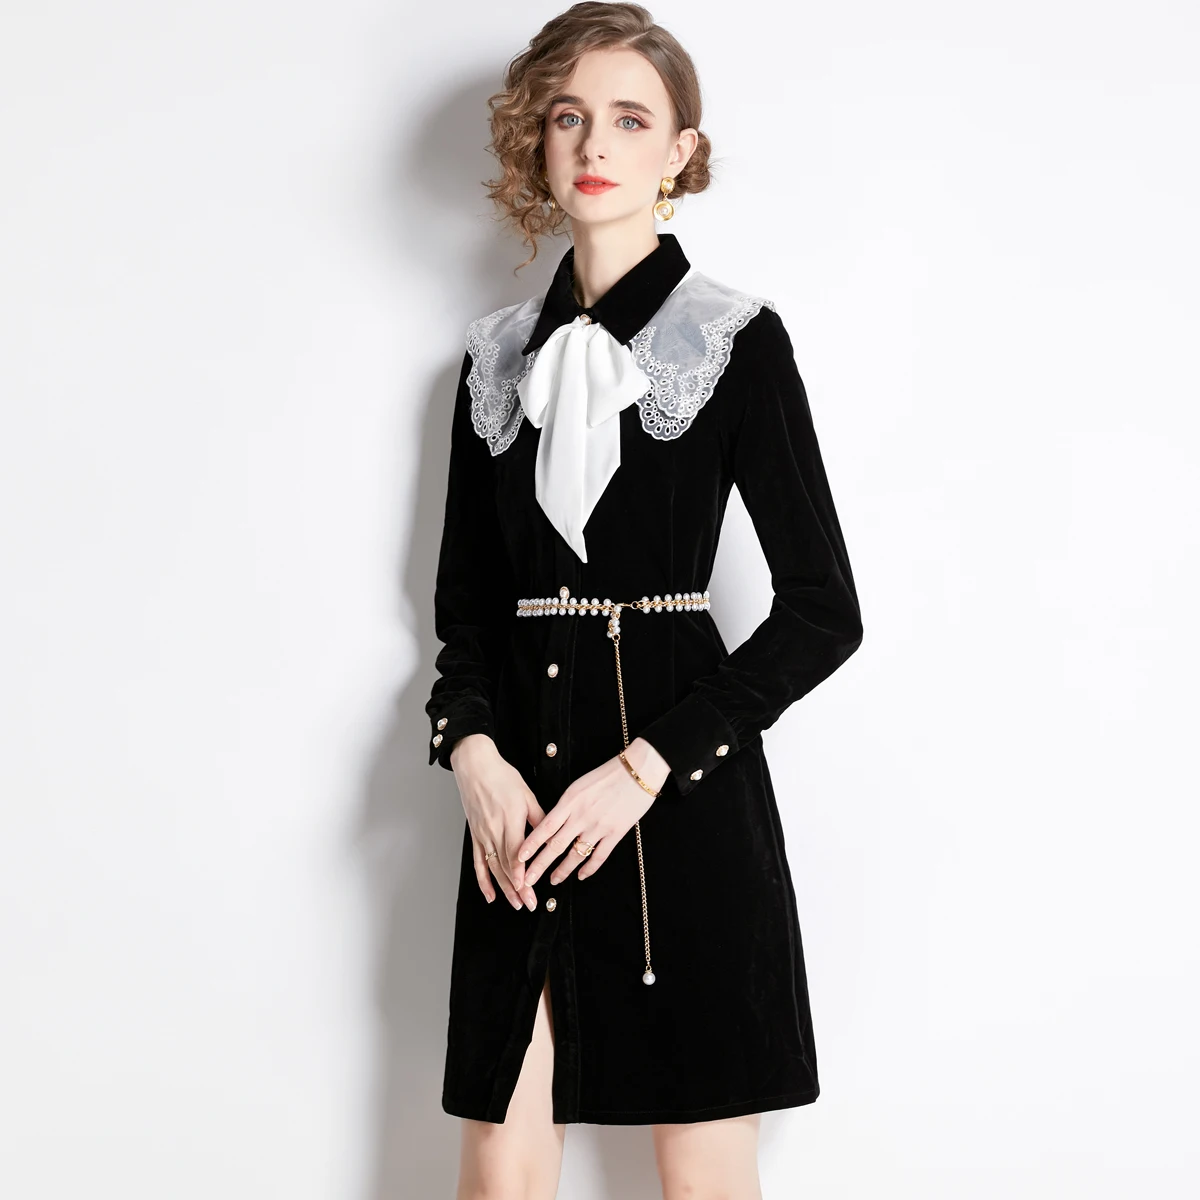 Autumn and winter elegant embroidery splicing bow neck dress women's long-sleeved dress